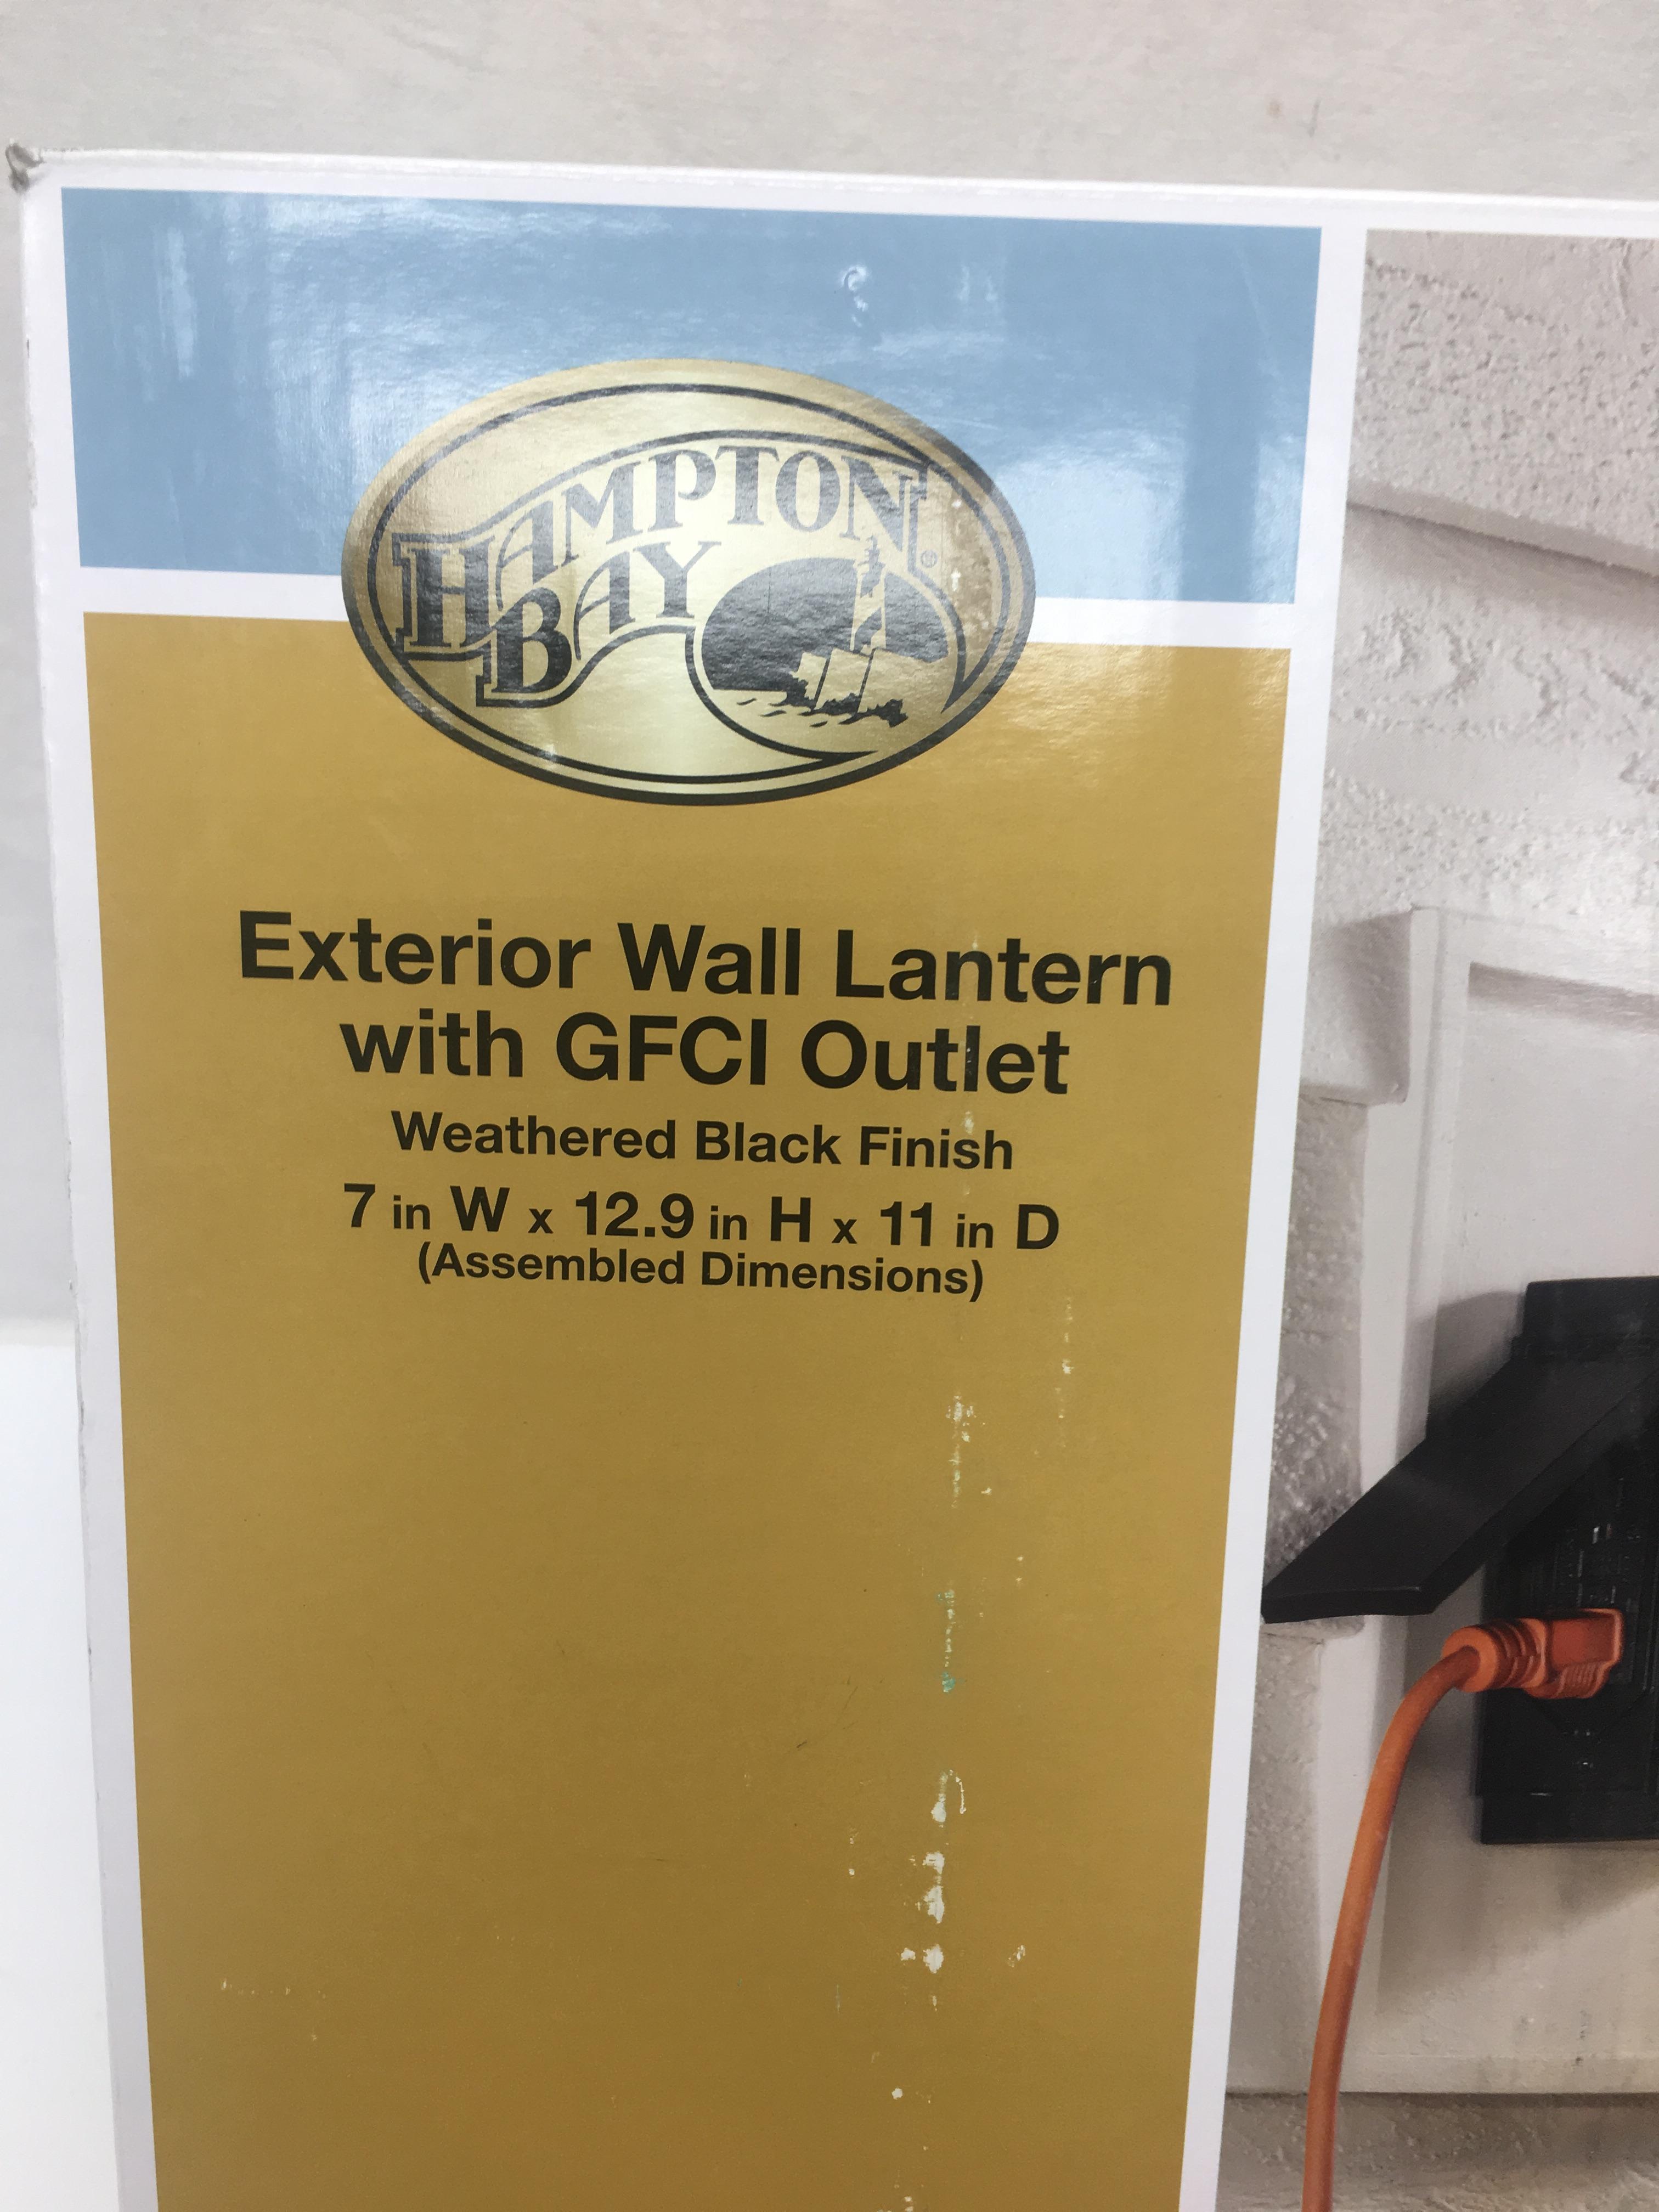 Hampton Bay Exterior Wall Lantern with GFCI Outlet